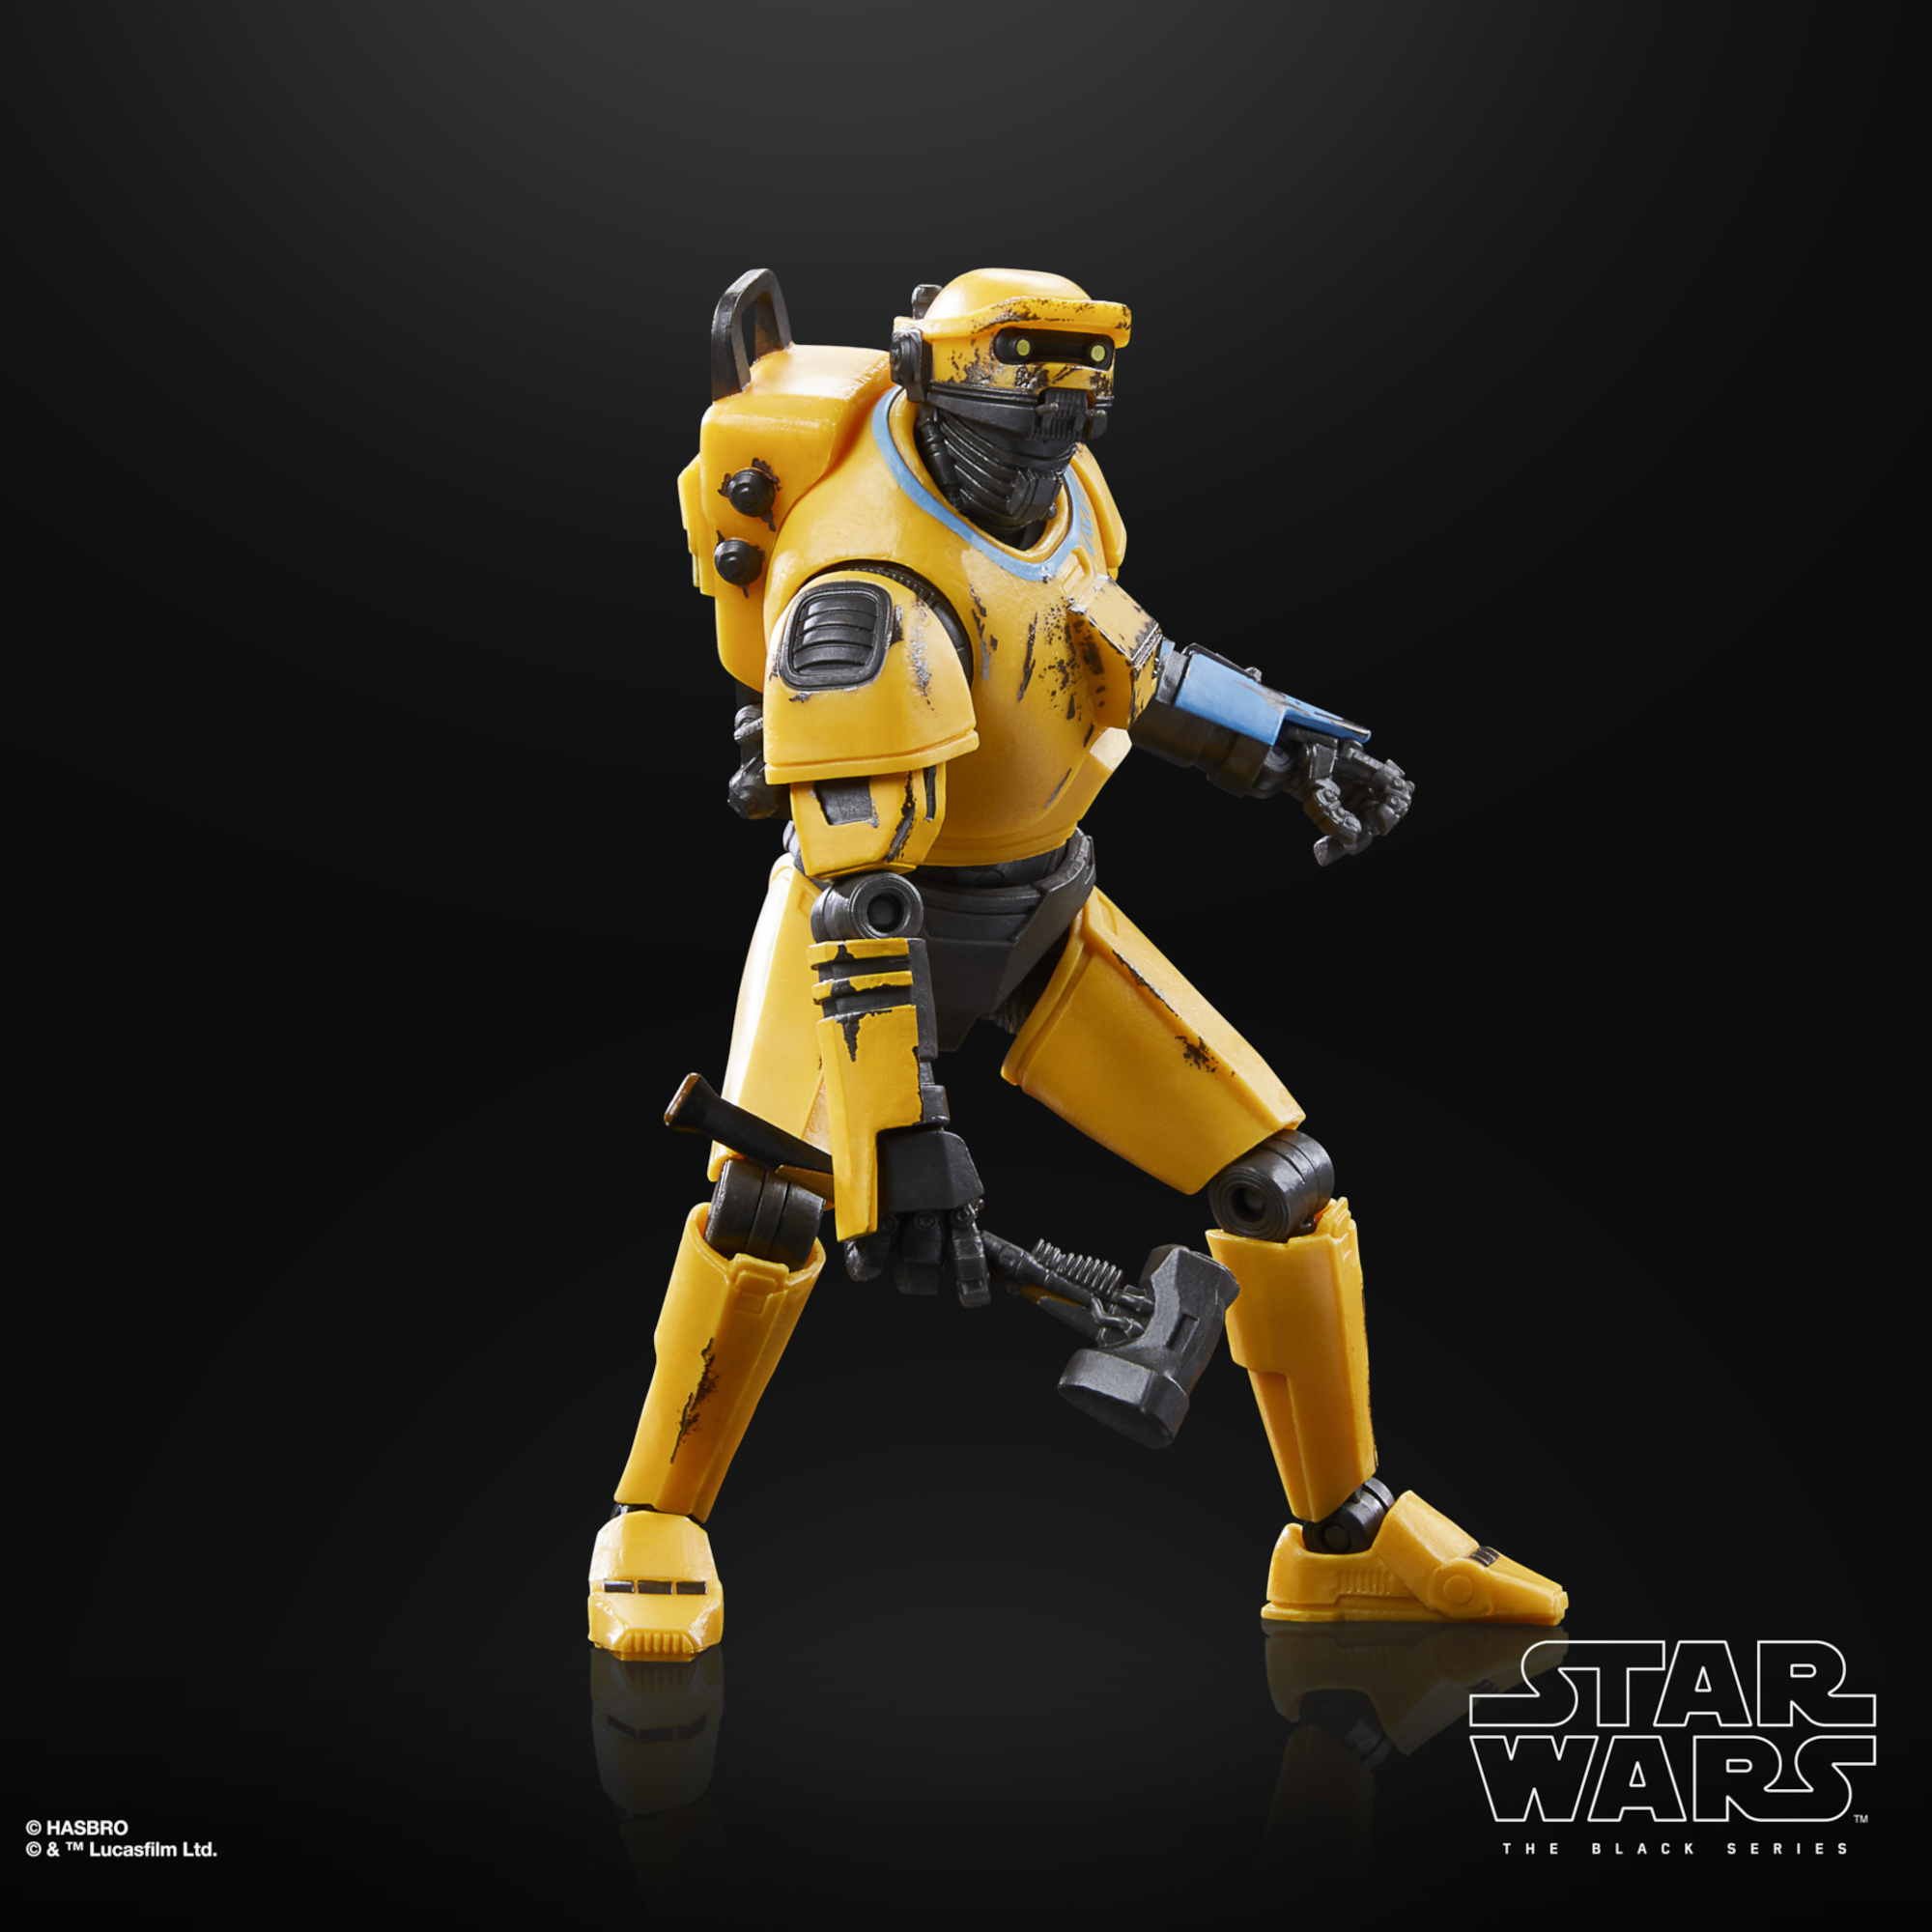 Image showing the NED-B figure in a pose with a hammer. Text on the image reads, Hasbro, lucasfilm ltd. Star Wars The Black Series